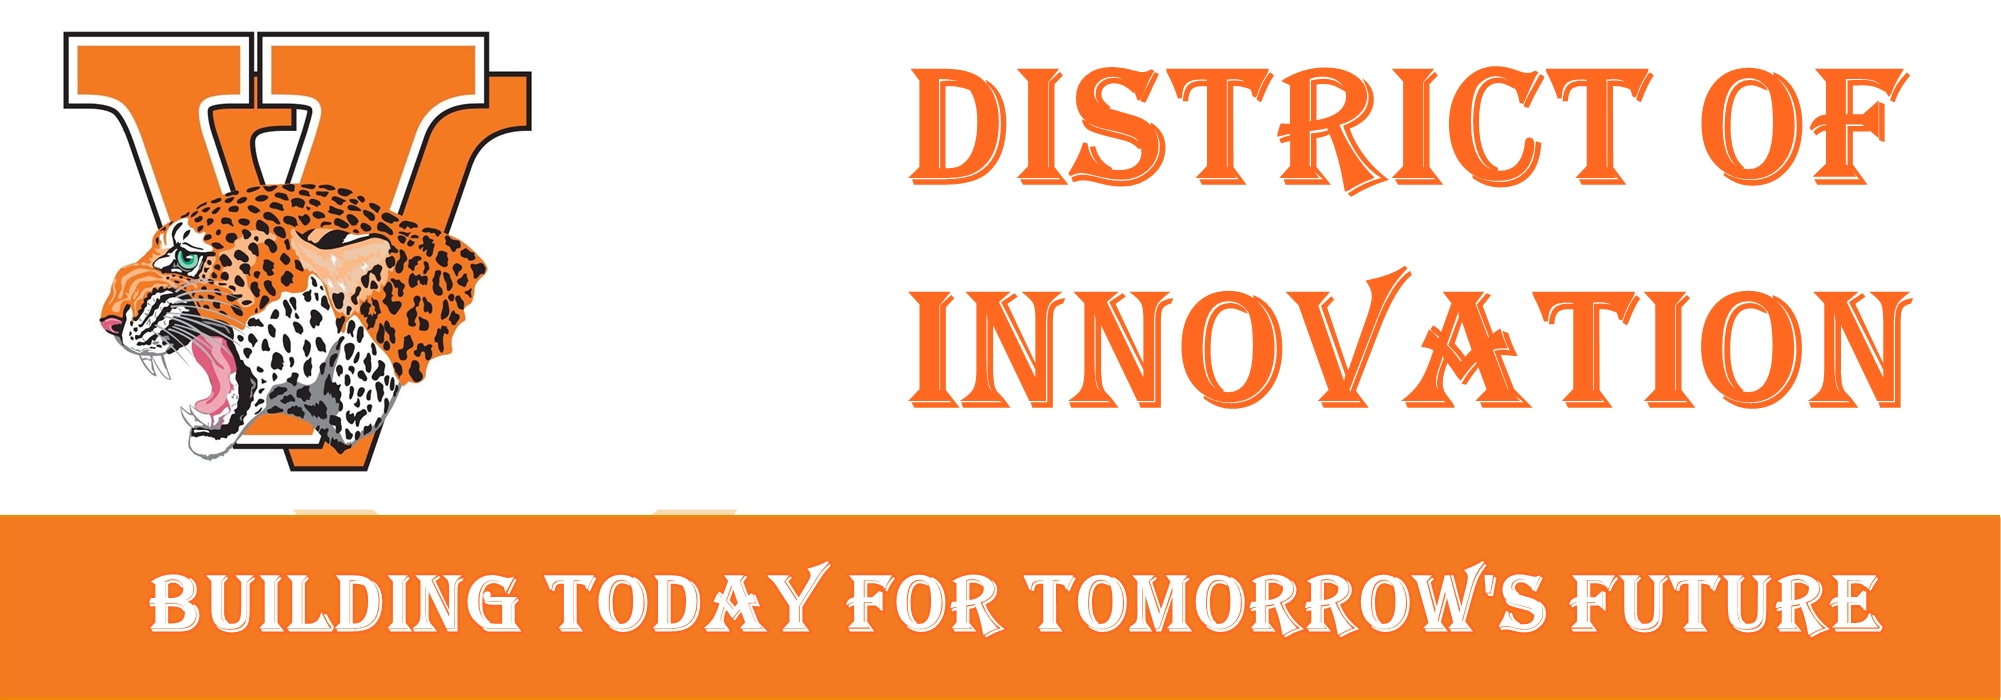 District of Innovation, Building Today for Tomorrow's Future